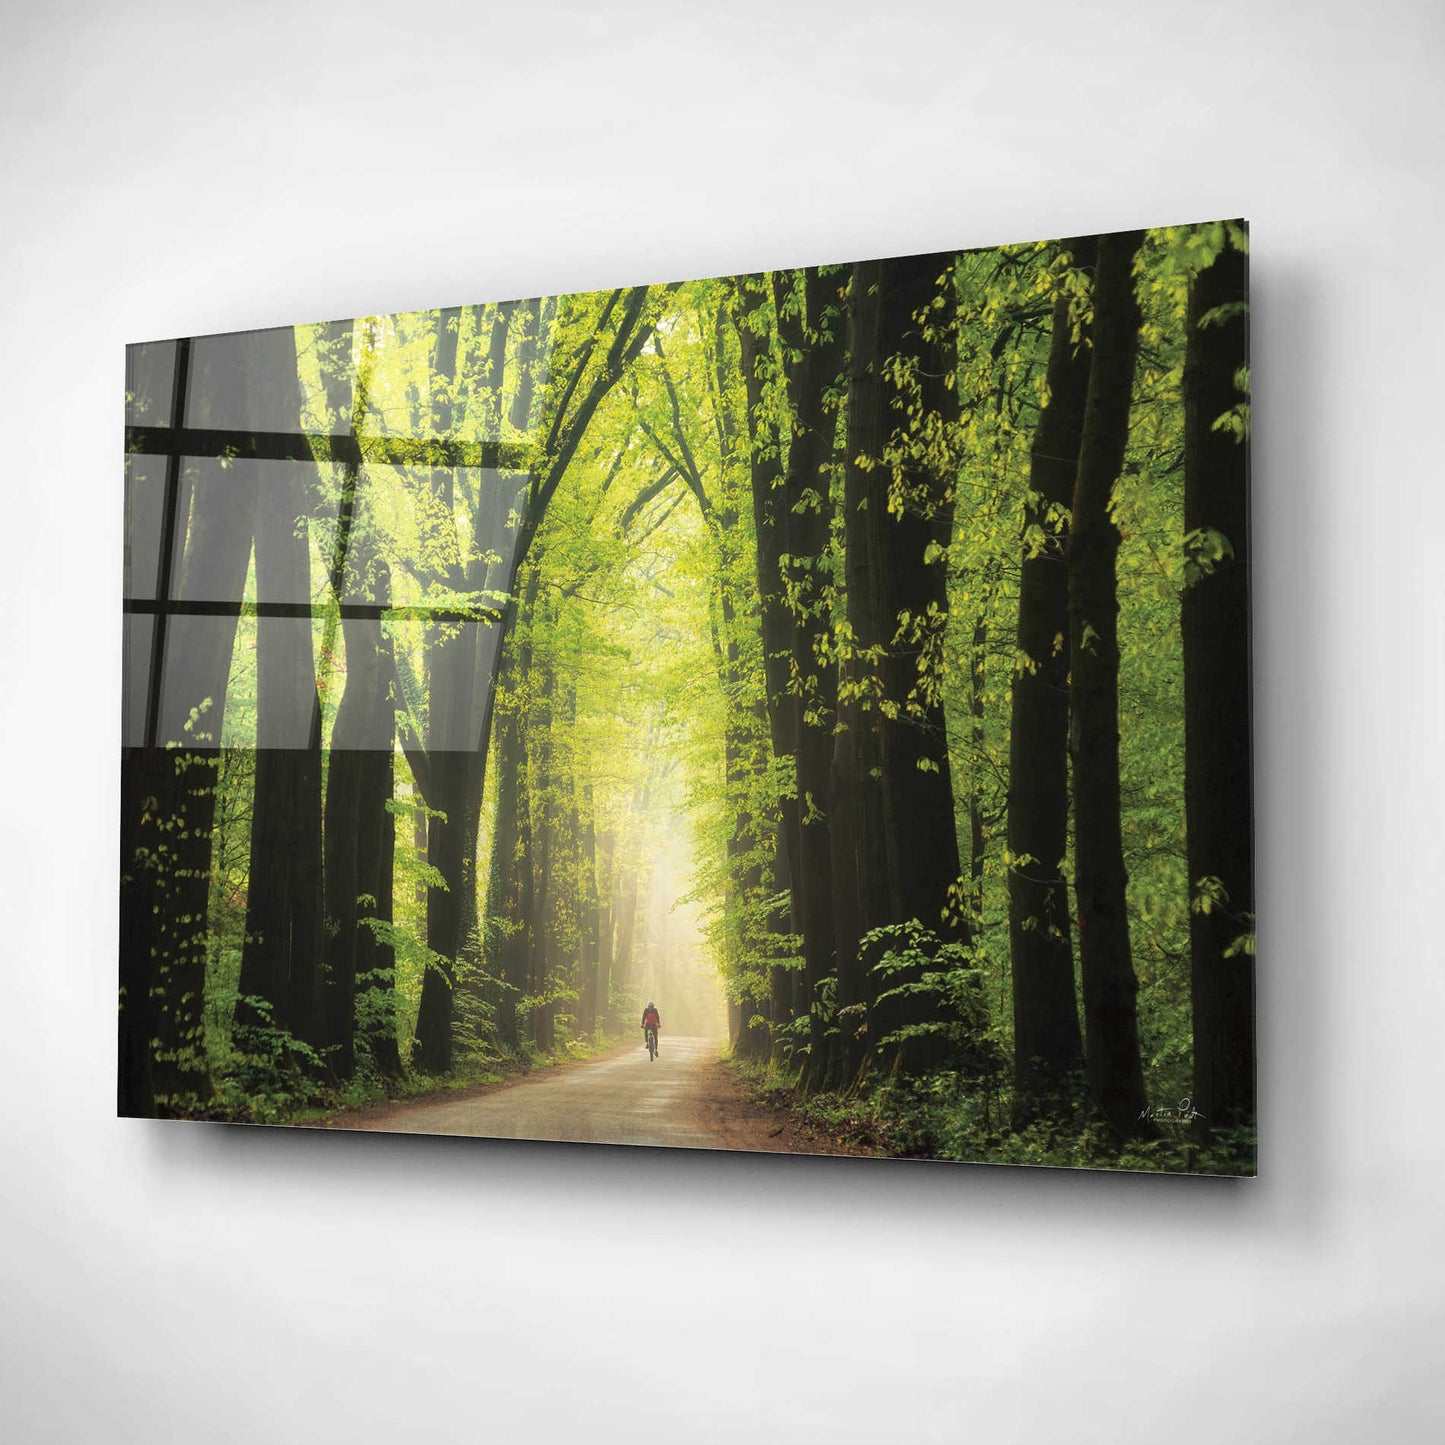 Epic Art 'Among Giants in Springtime' by Martin Podt, Acrylic Glass Wall Art,24x16